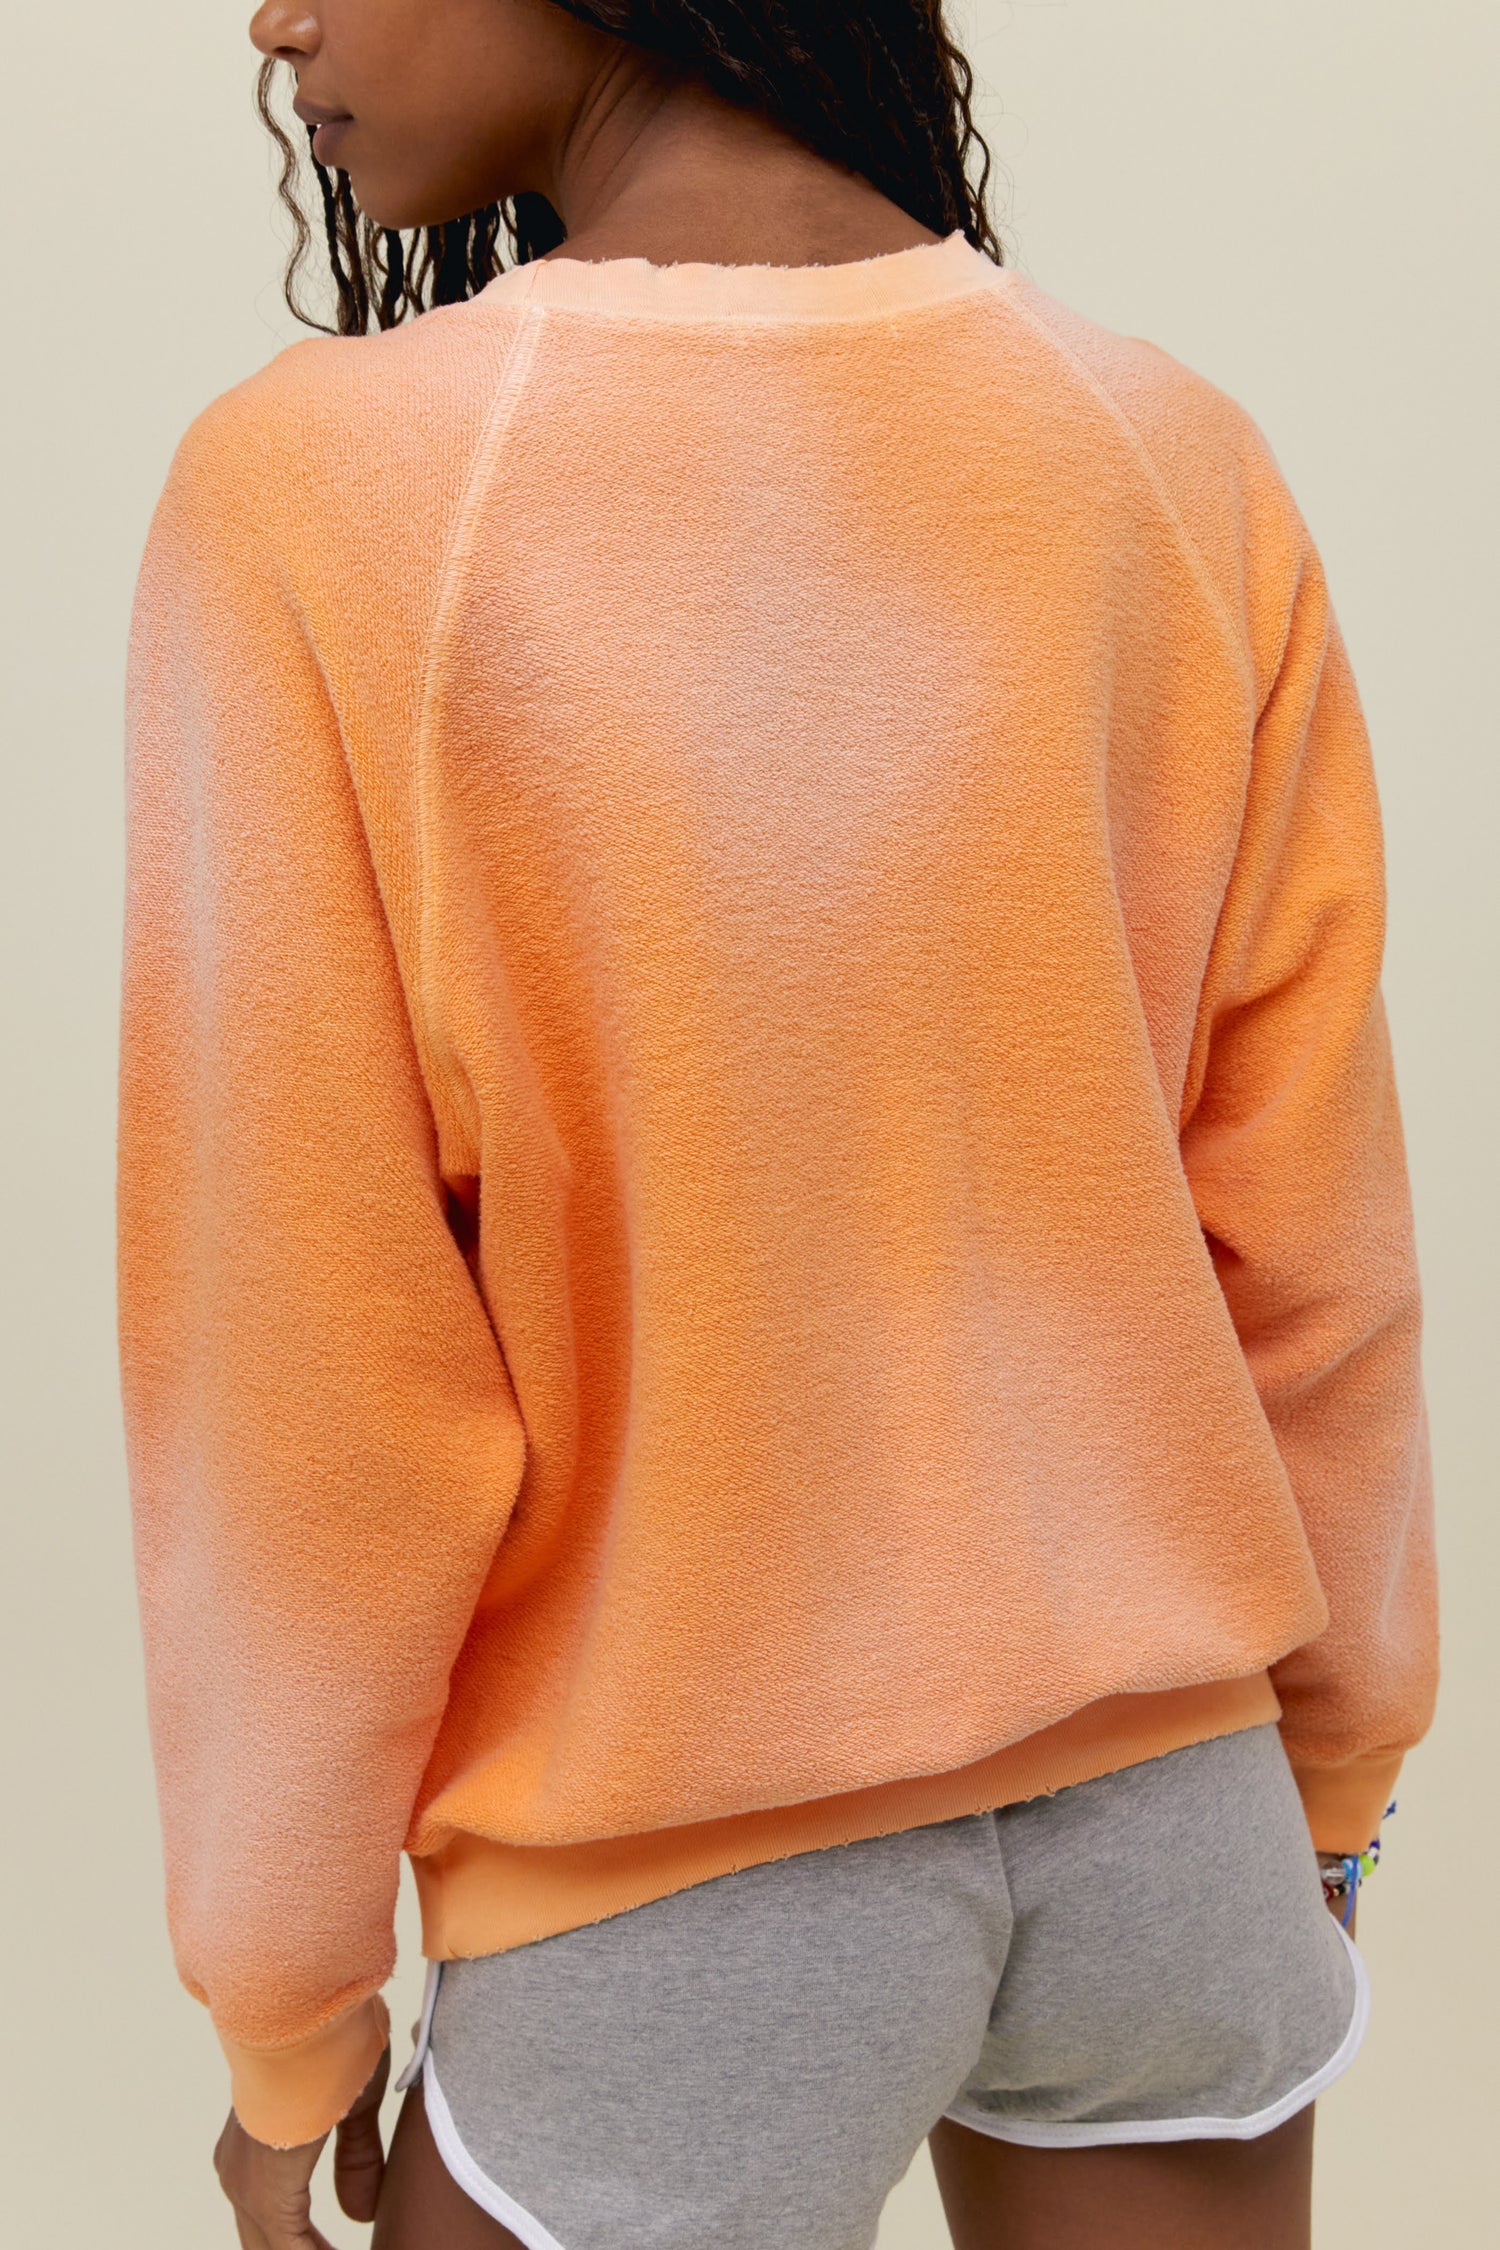 A model featuring a soft peach raglan crew stamped with "Pegasus Aviation Flight School" and a graphic of a pegasus on the center.